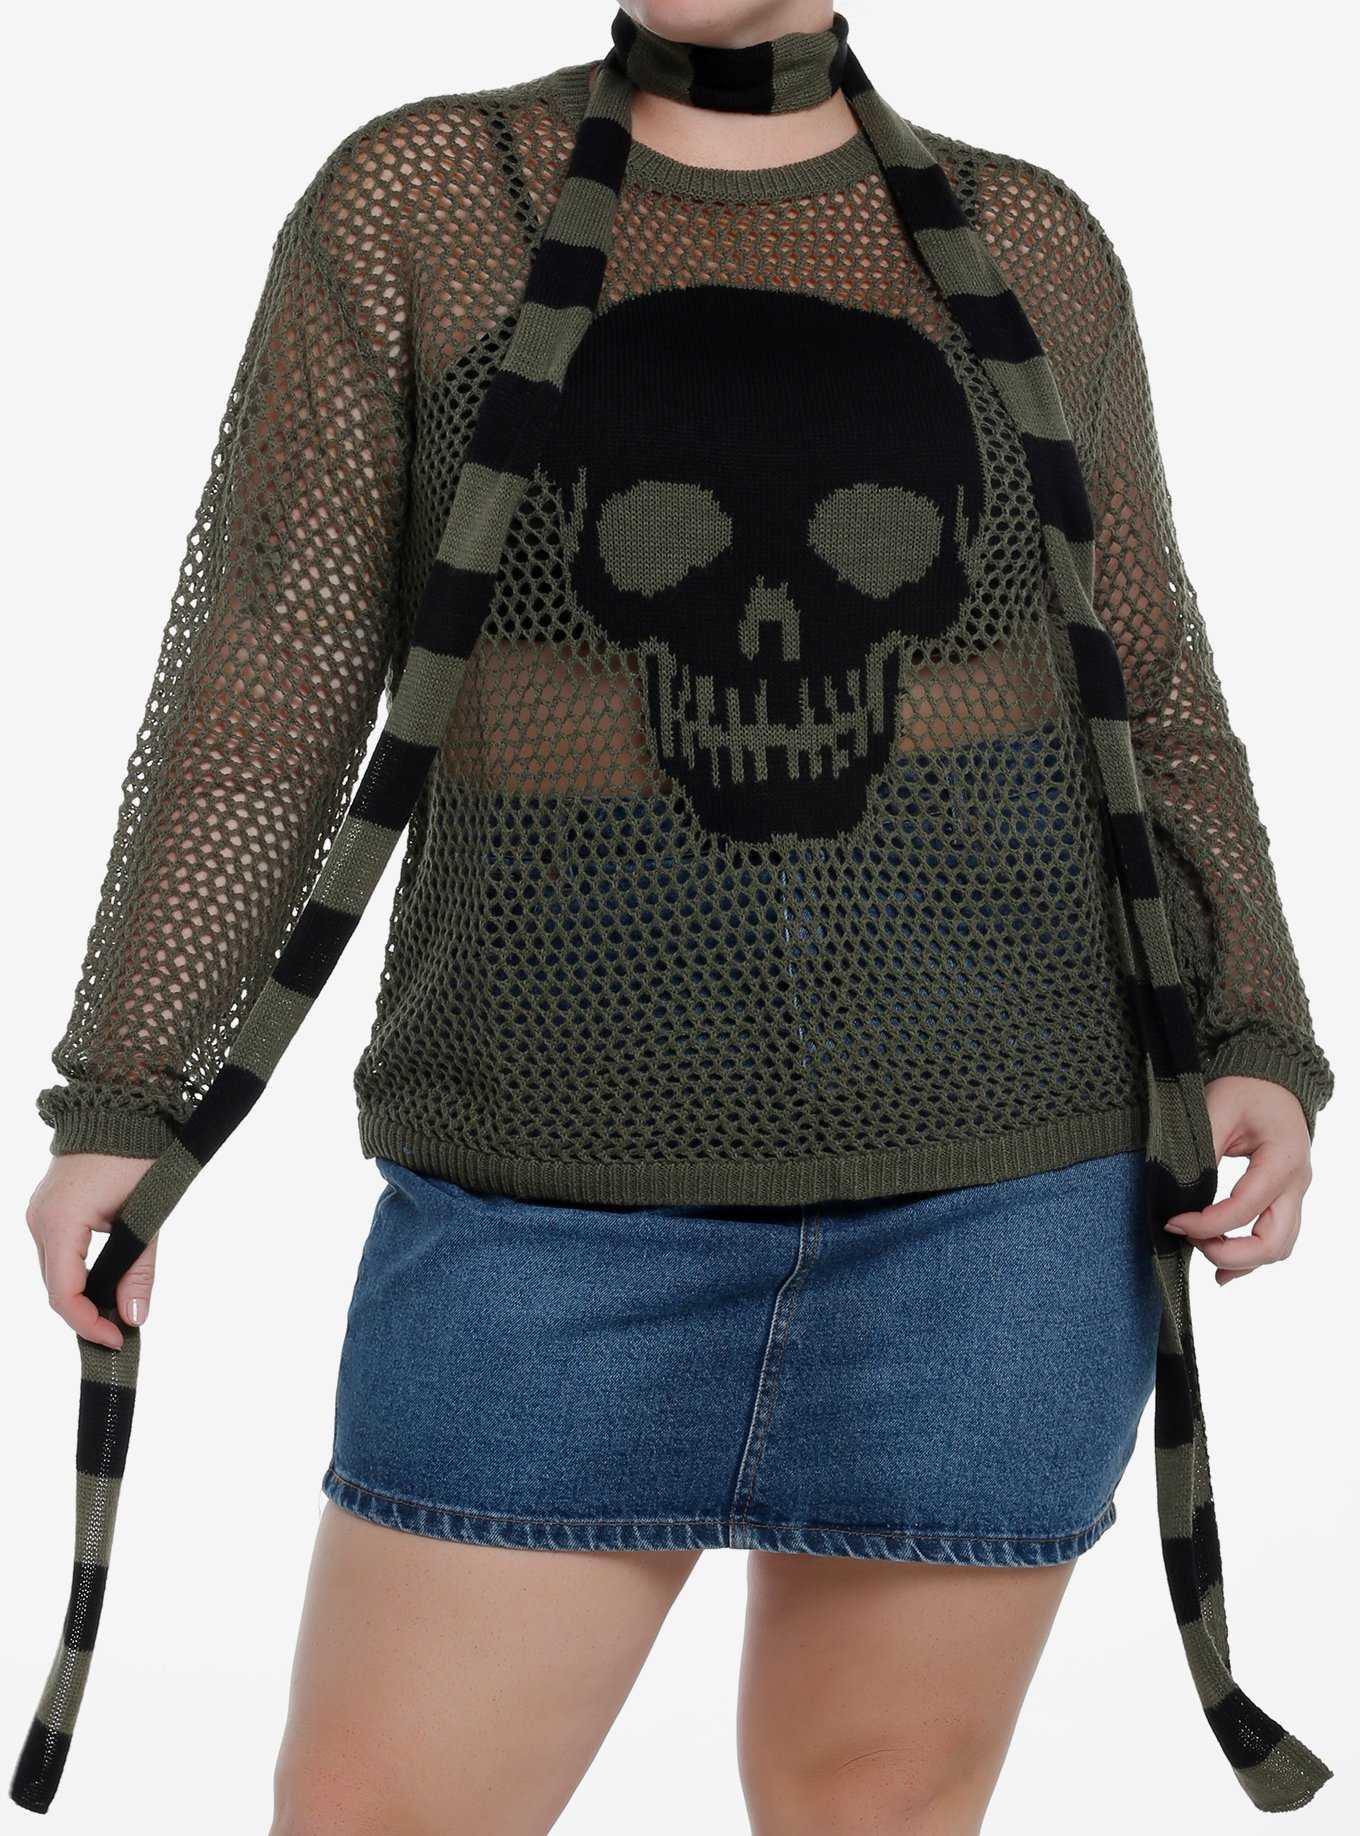 Social Collision Skull Girls Knit Sweater With Scarf Plus Size, , hi-res